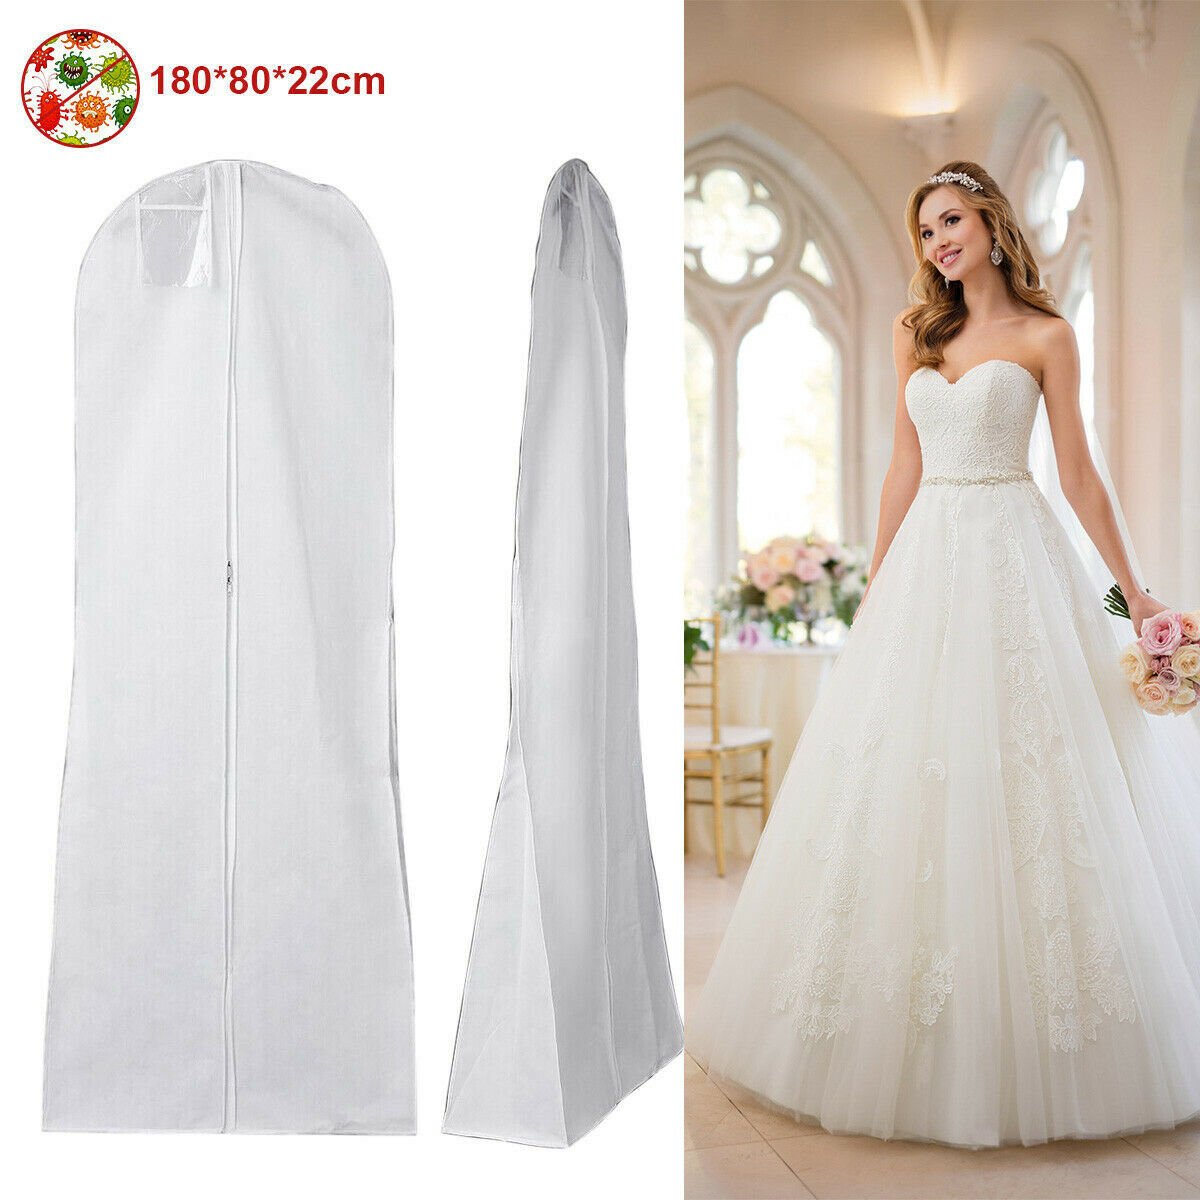 Dustproof Wedding Dress Storage Clothes Bag Cover For ...